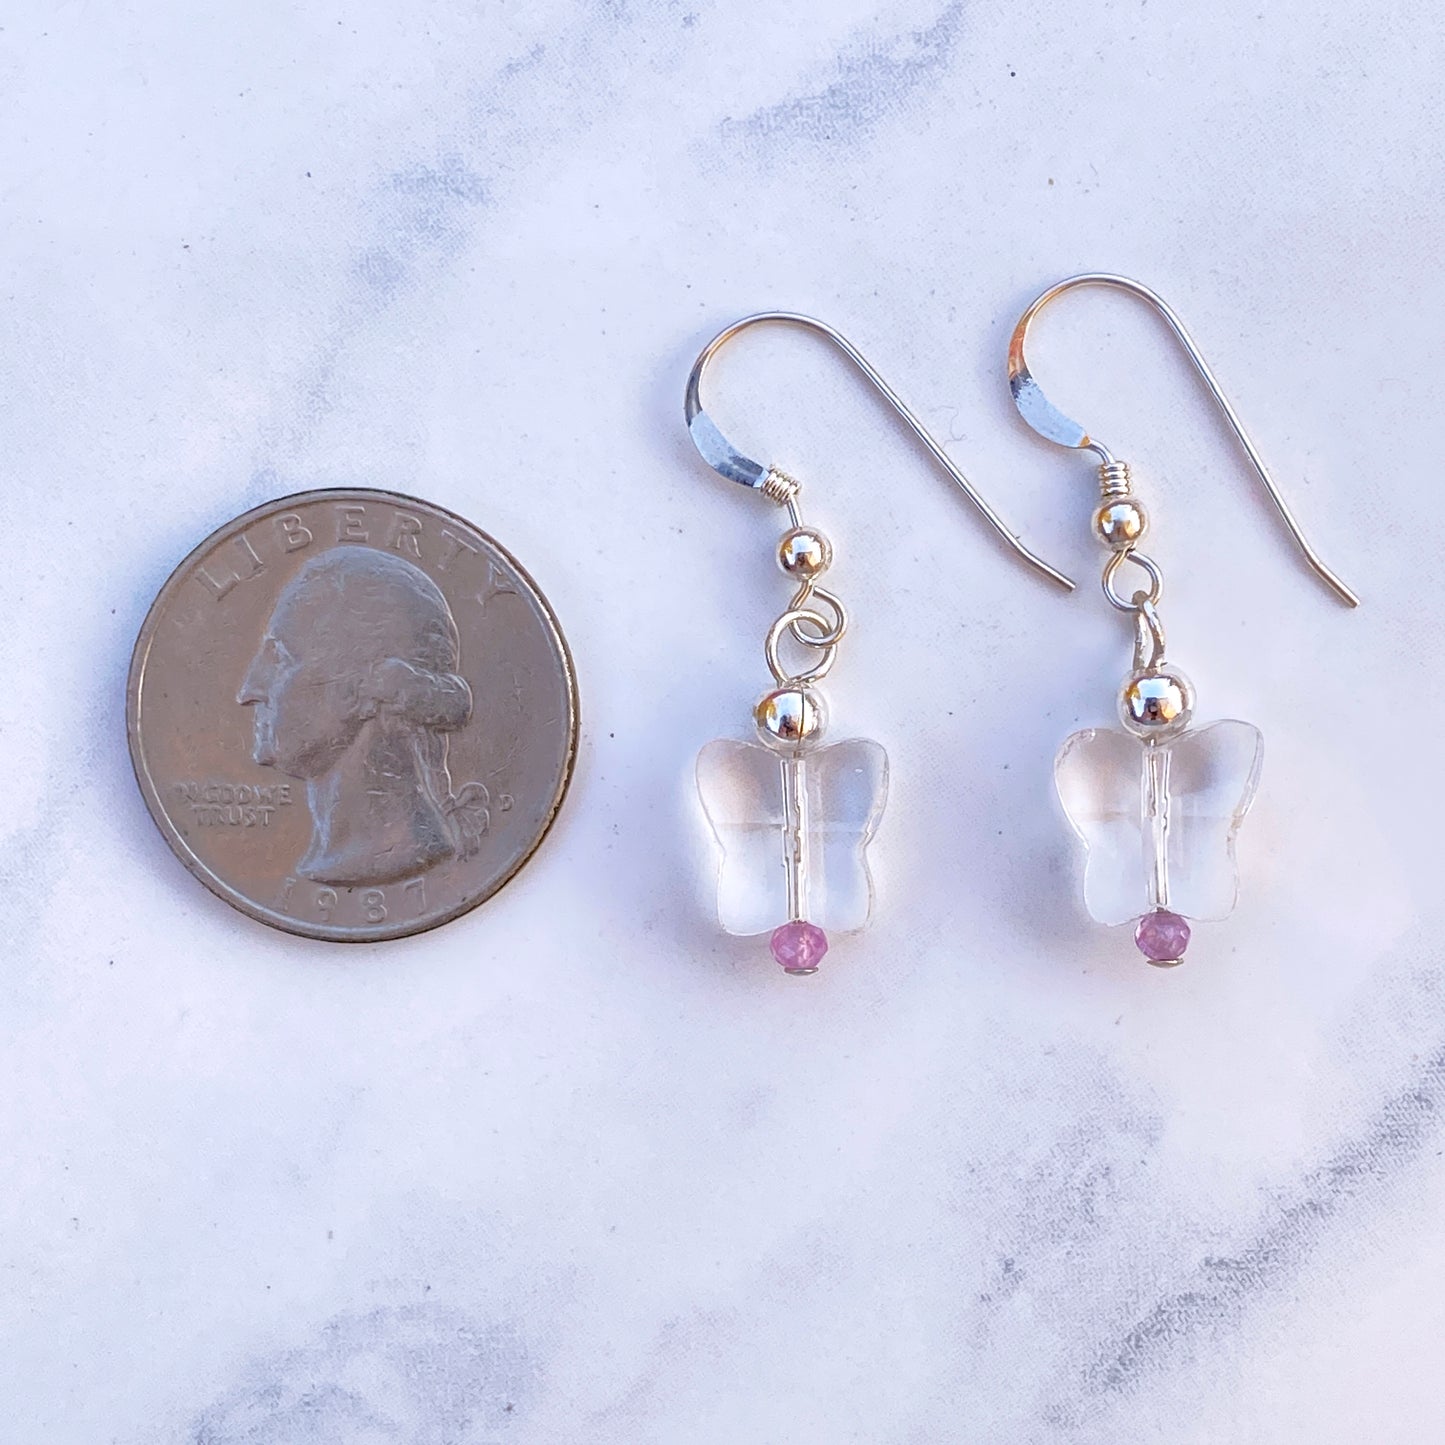 Clear Quartz Butterflies with Pink Sapphires and Sterling Silver Drop Earrings